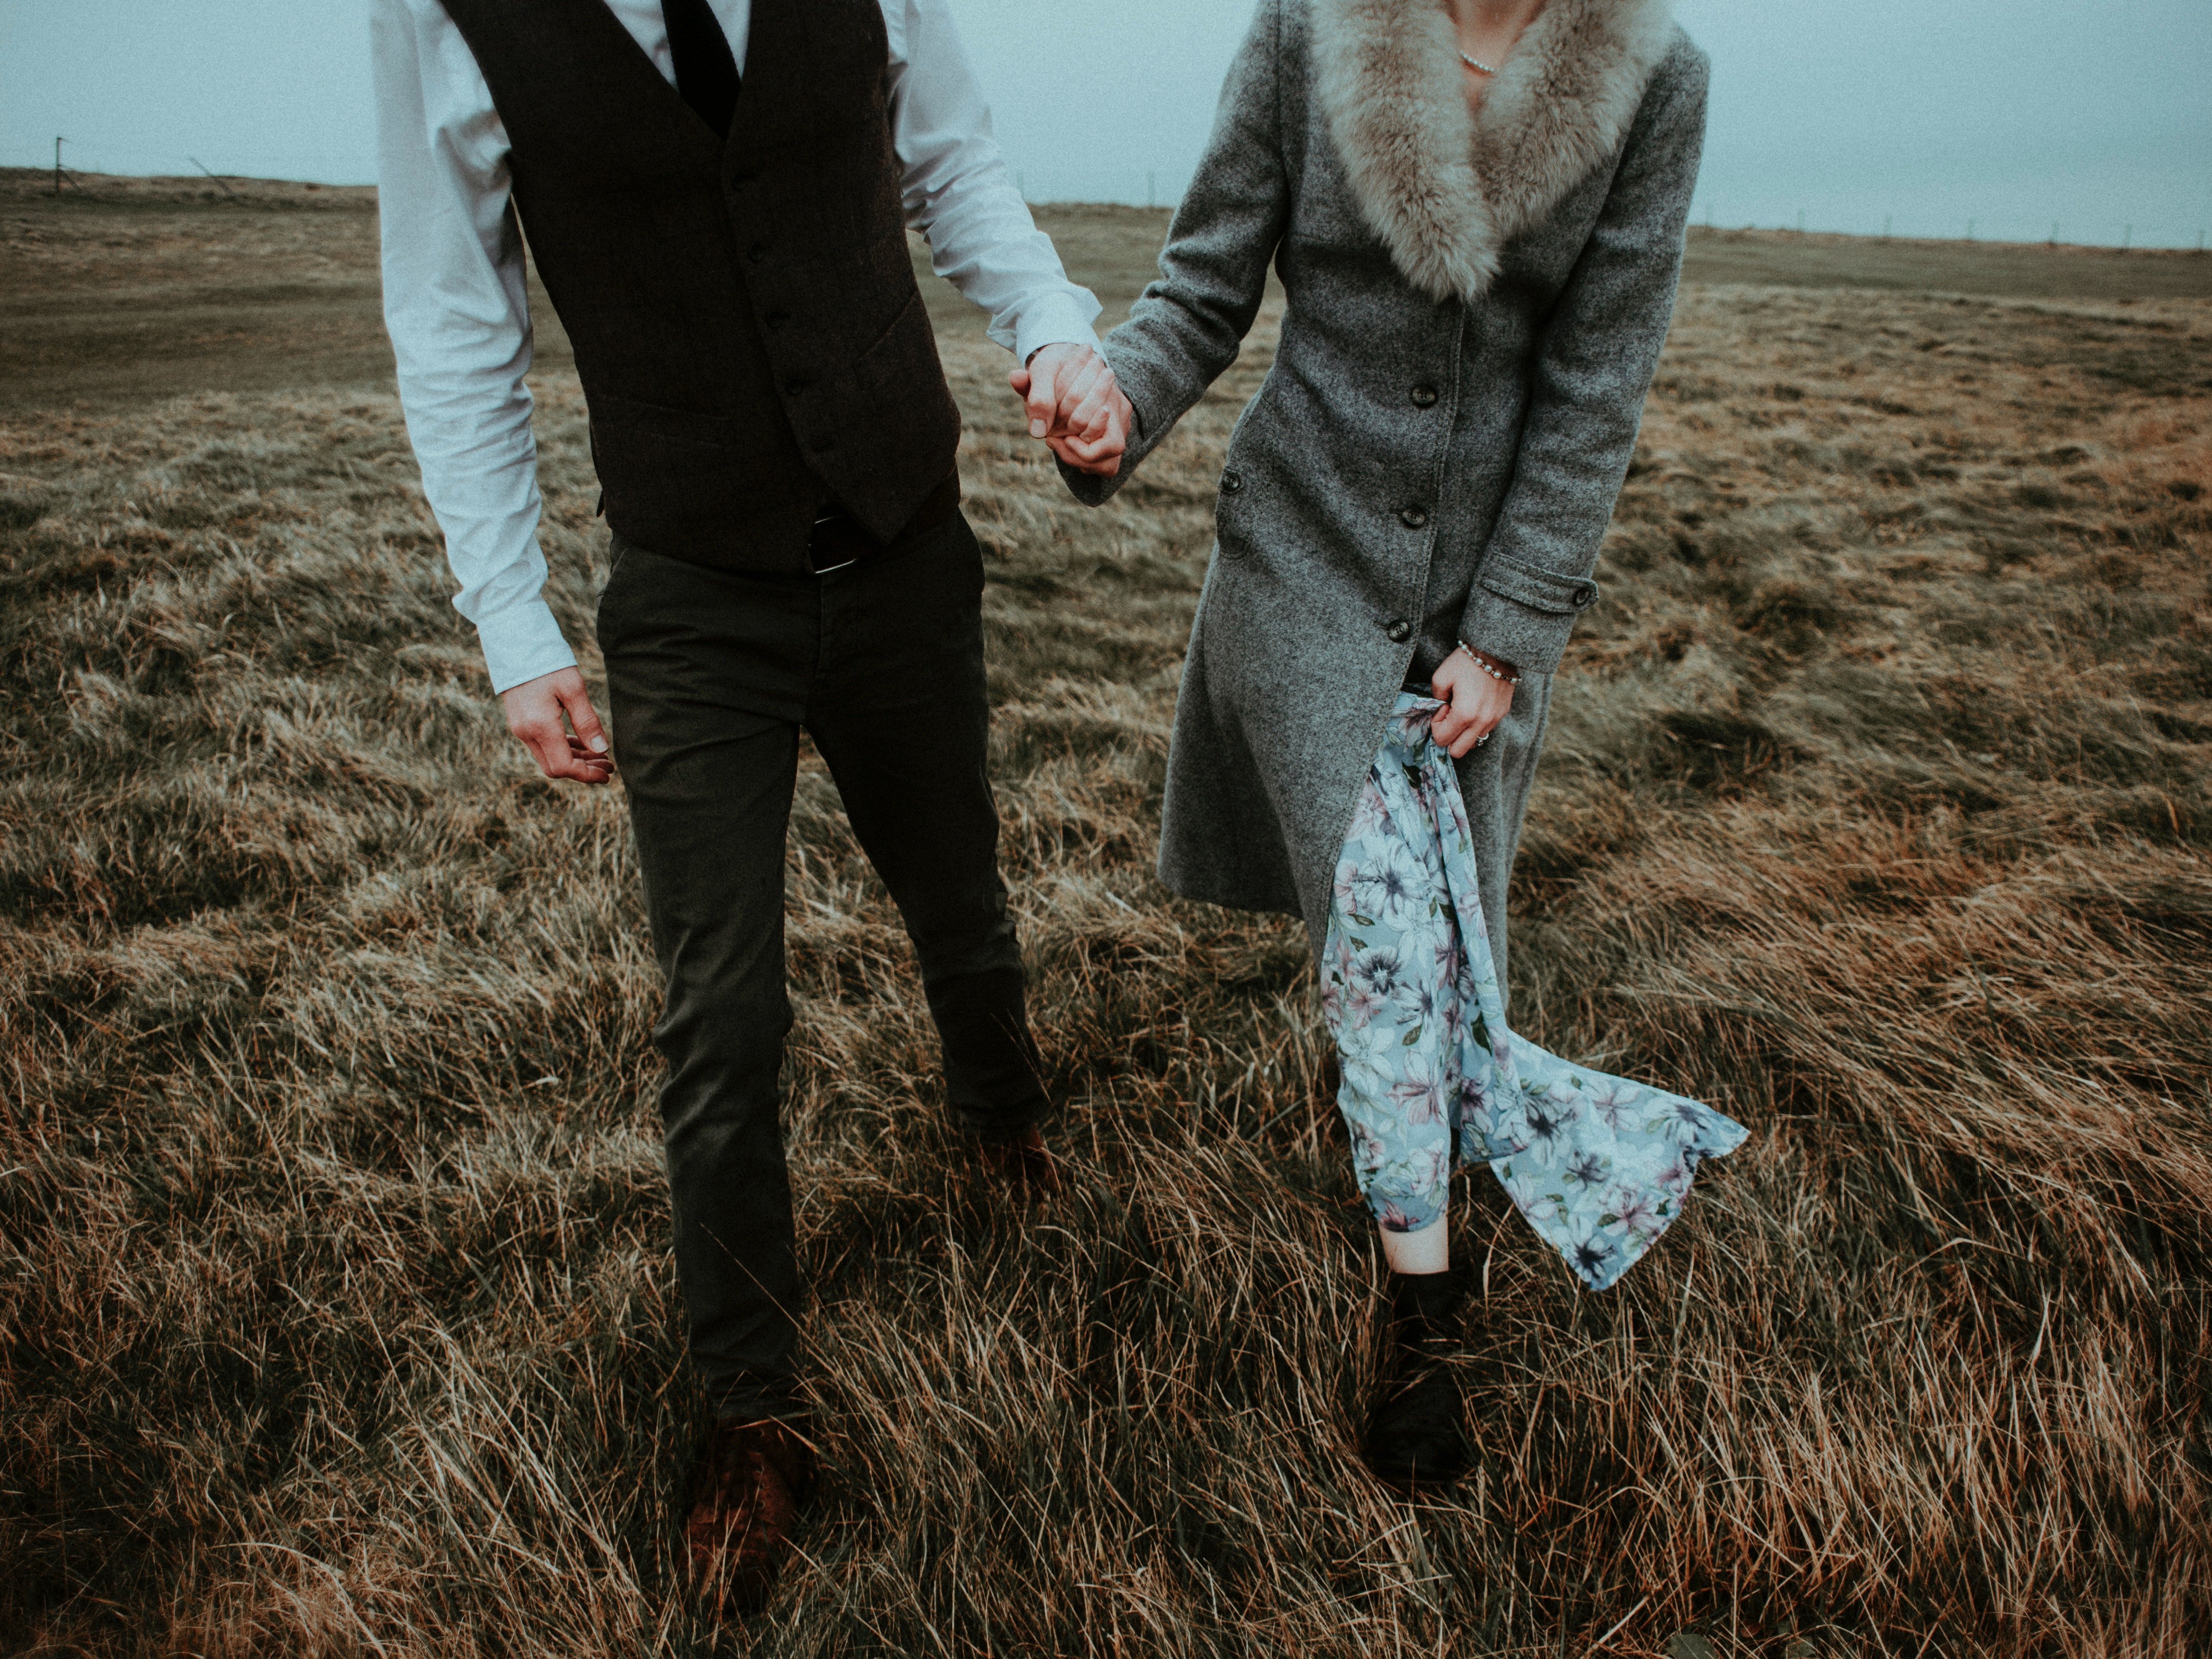 A couple holding hands. | Source: Pexels